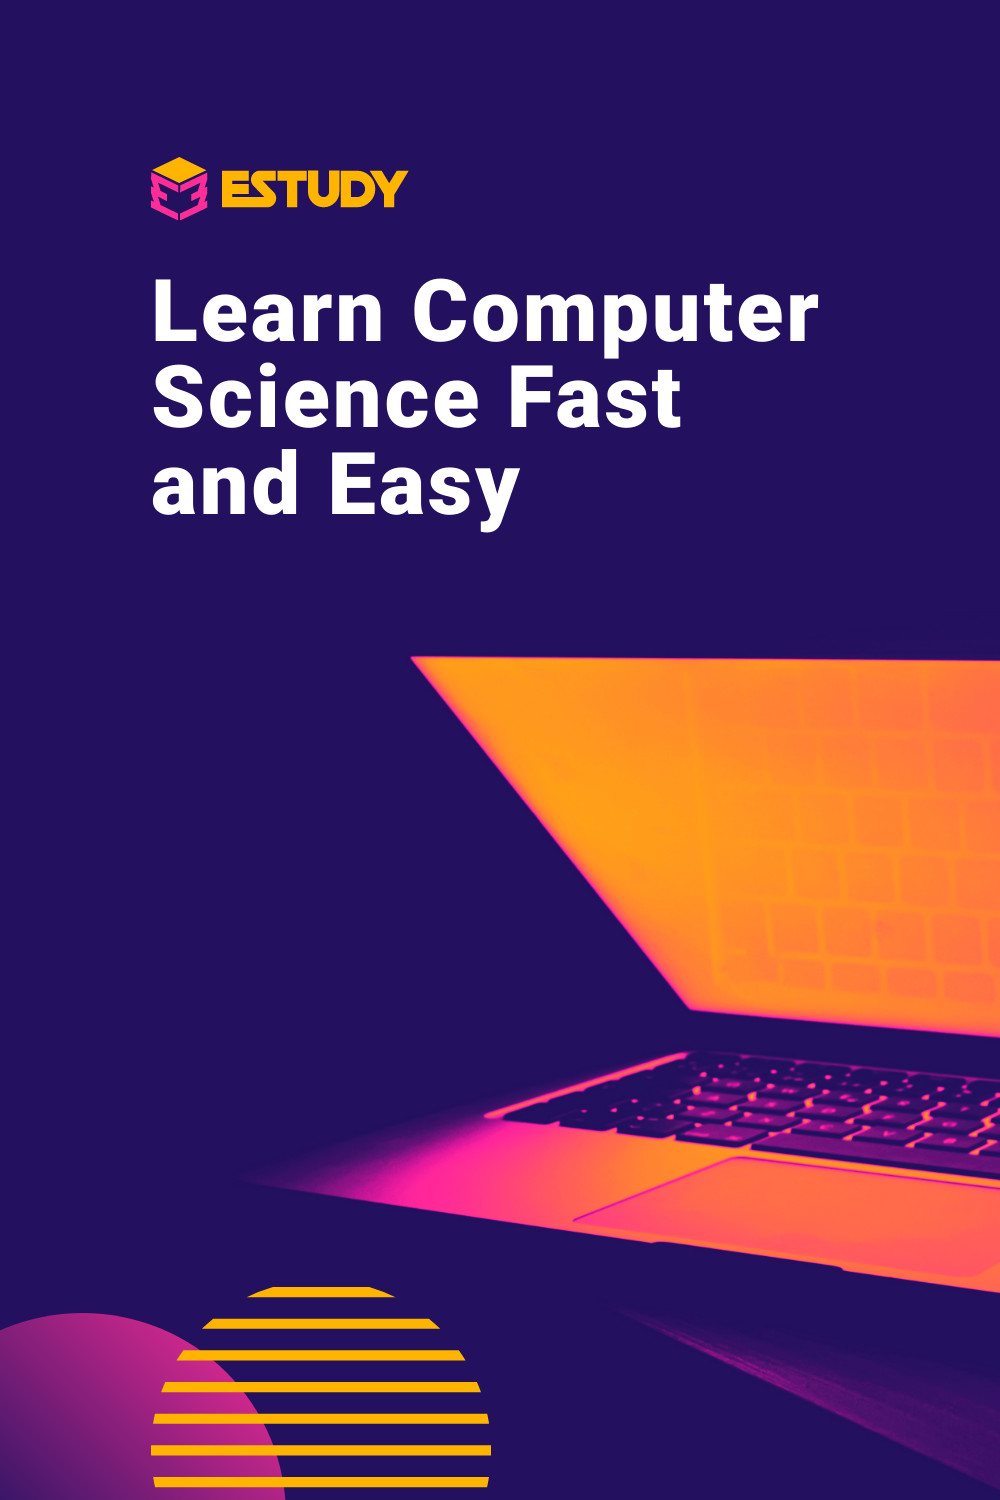 Learn Computer Science Fast Facebook Cover 820x360